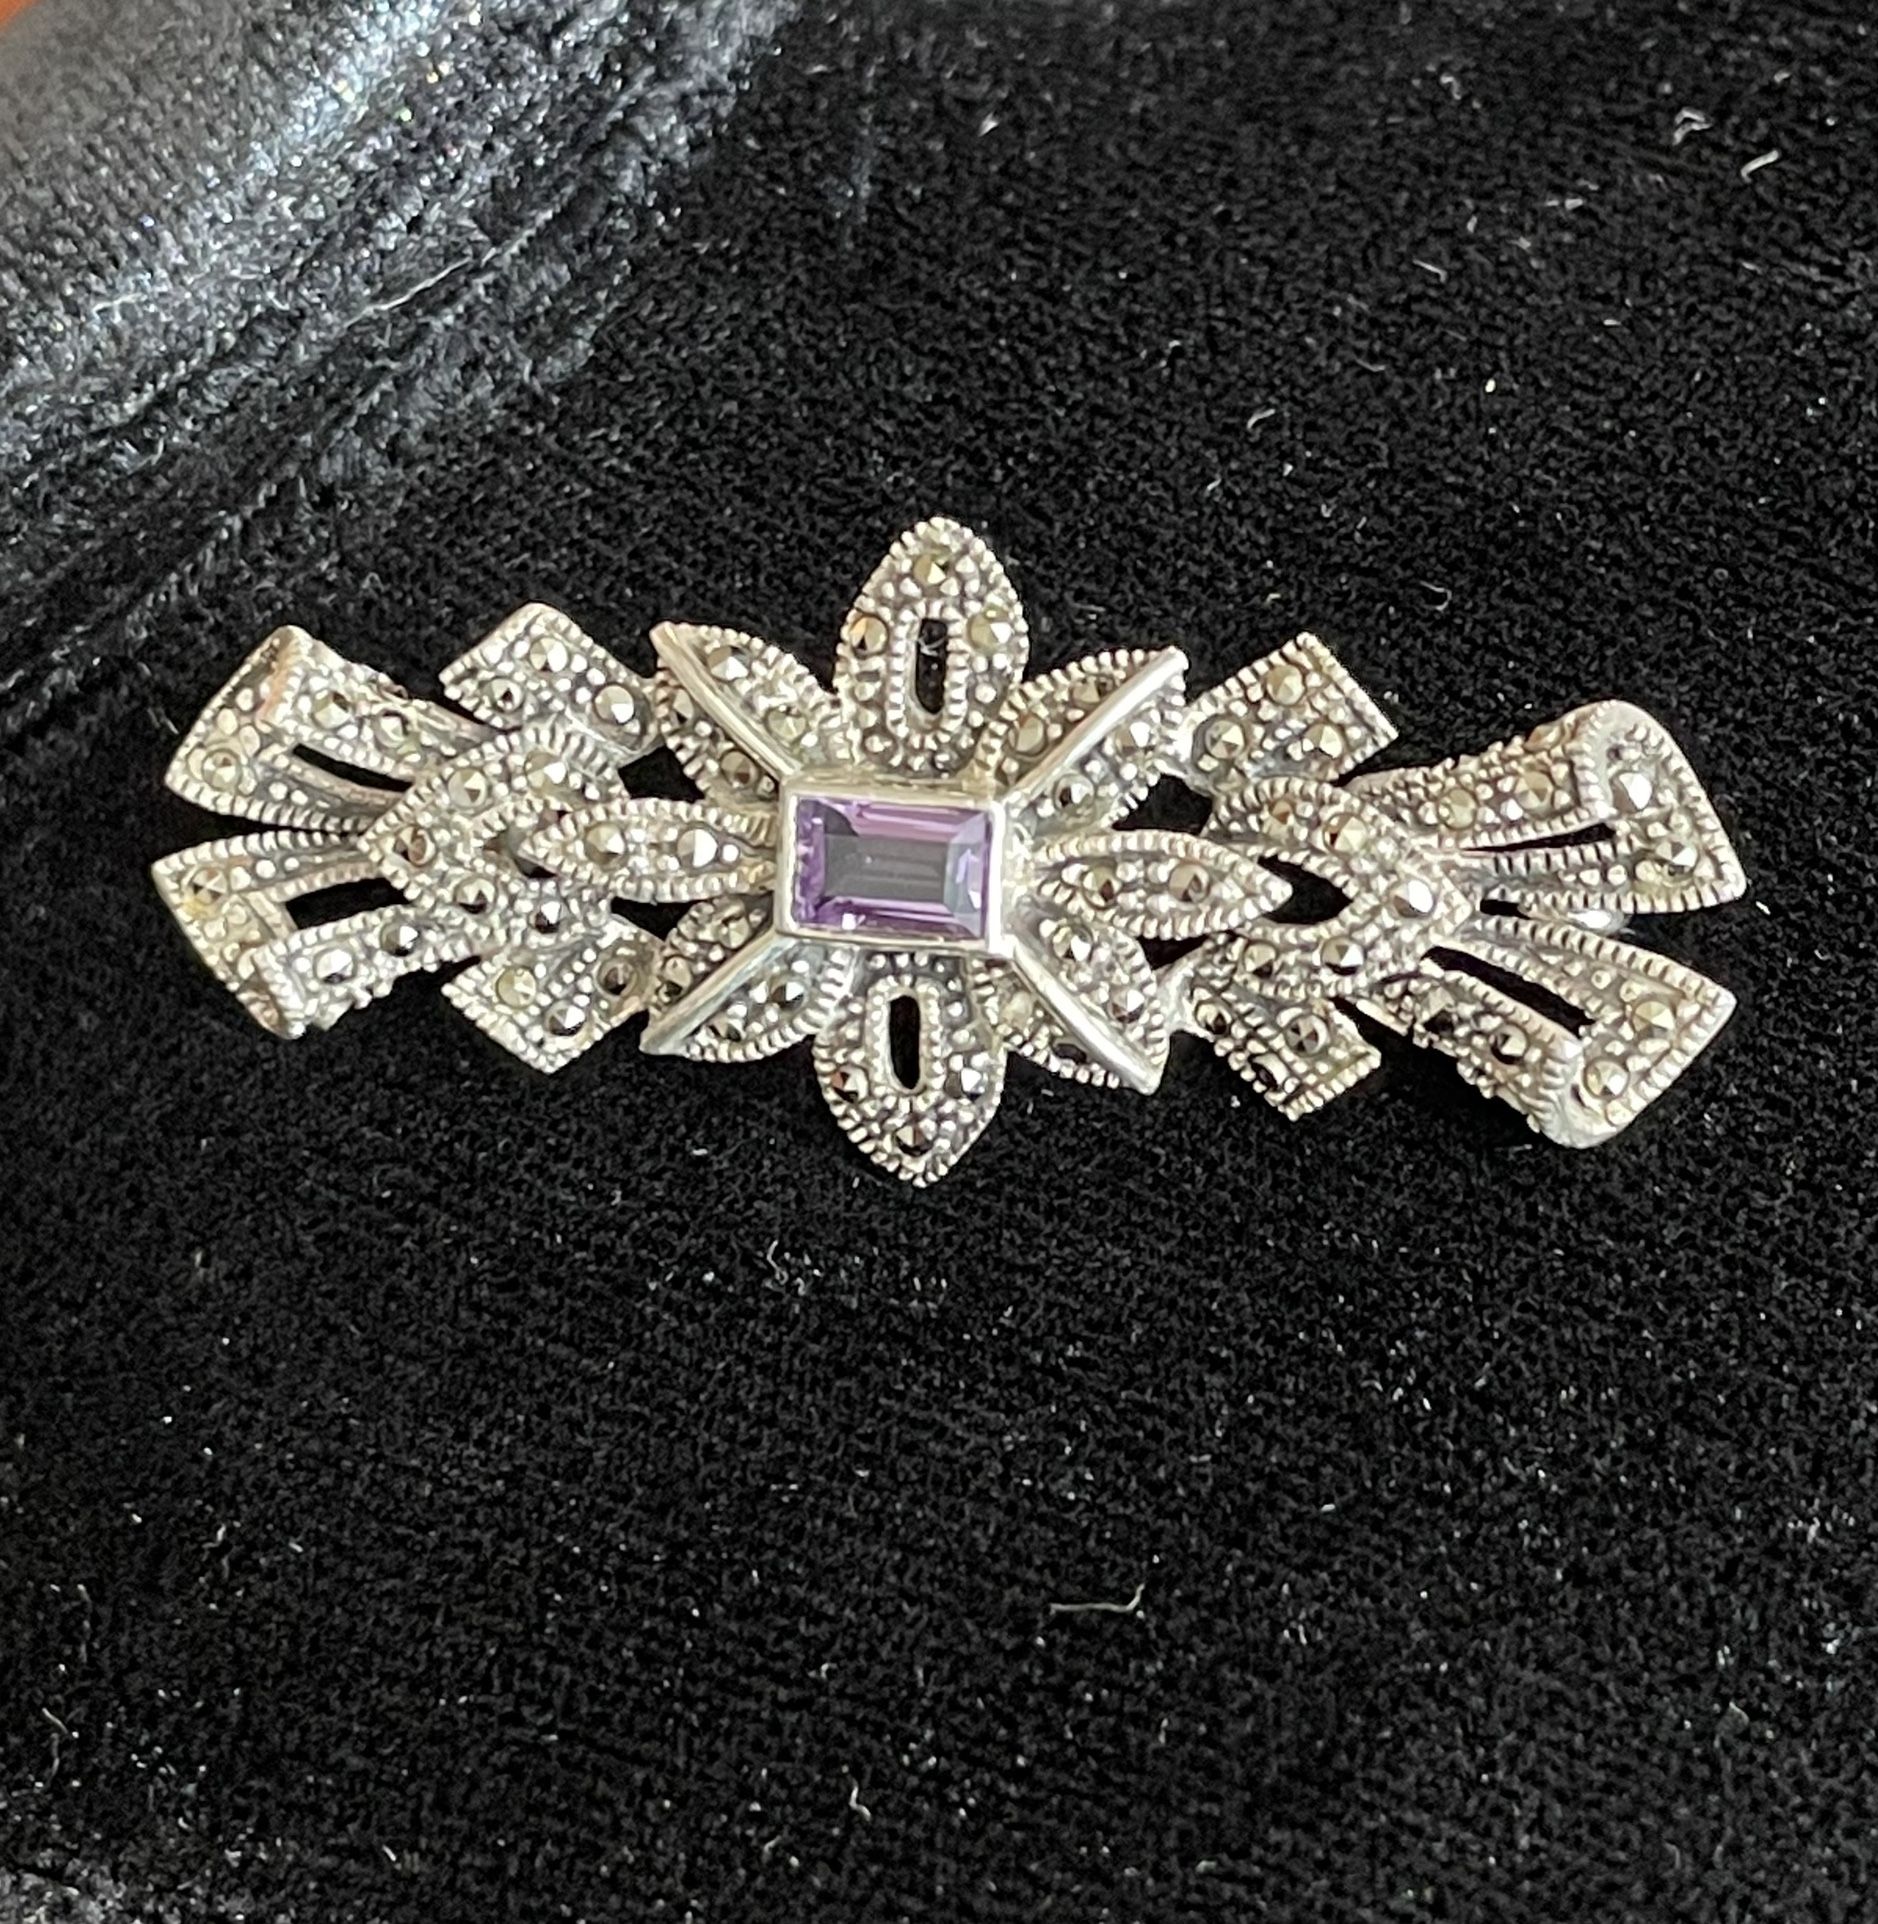 1(contact info removed) Vintage Art Deco Sterling Silver 925 Marcasite Amethyst Brooch Pin.